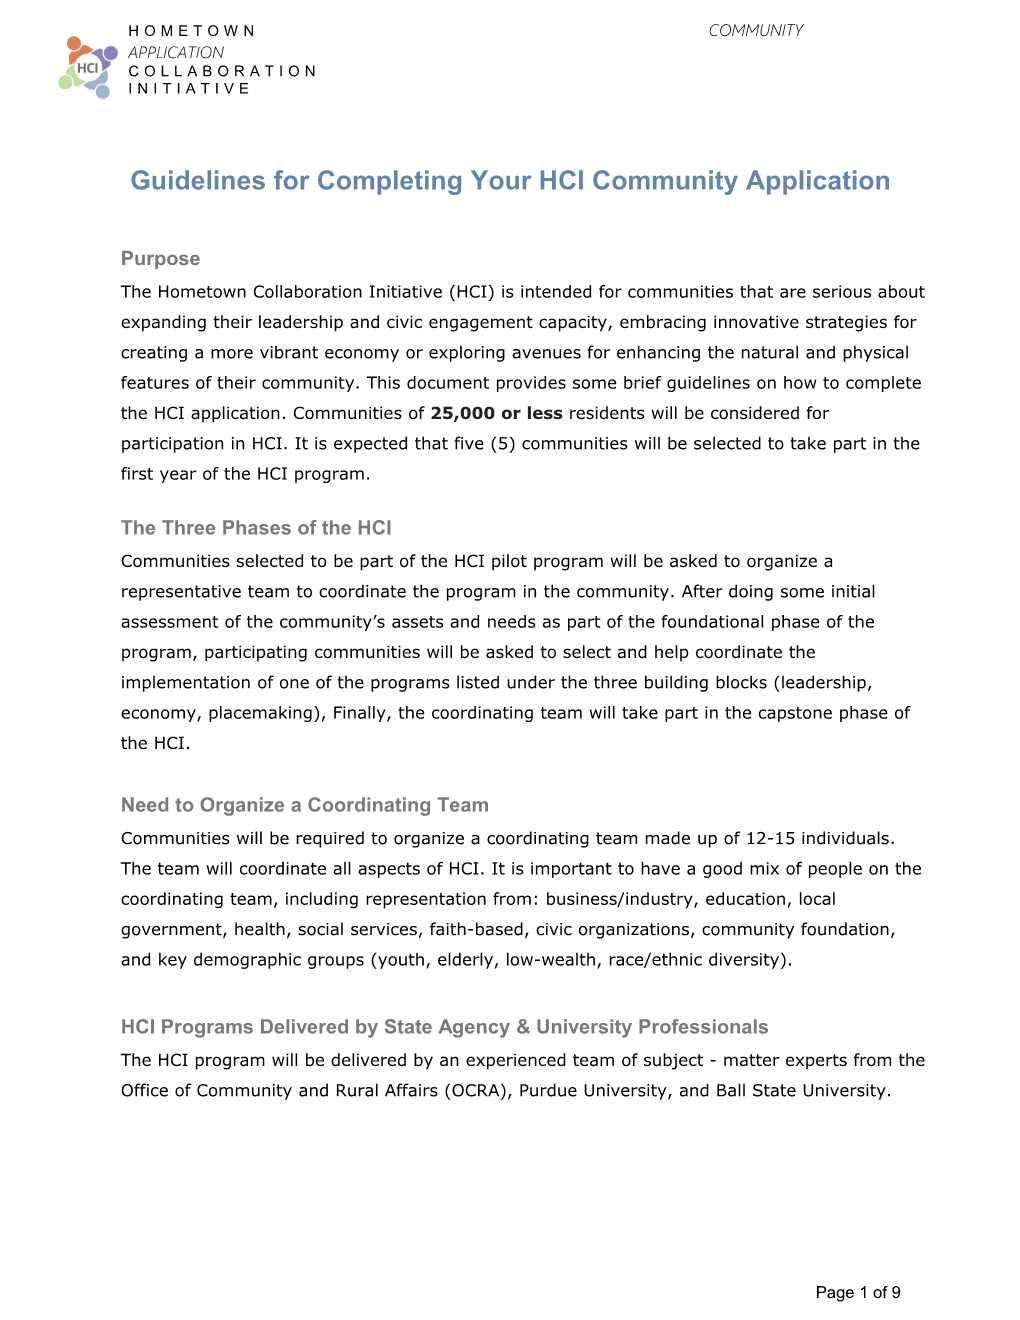 Guidelines for Completing Your HCI Community Application